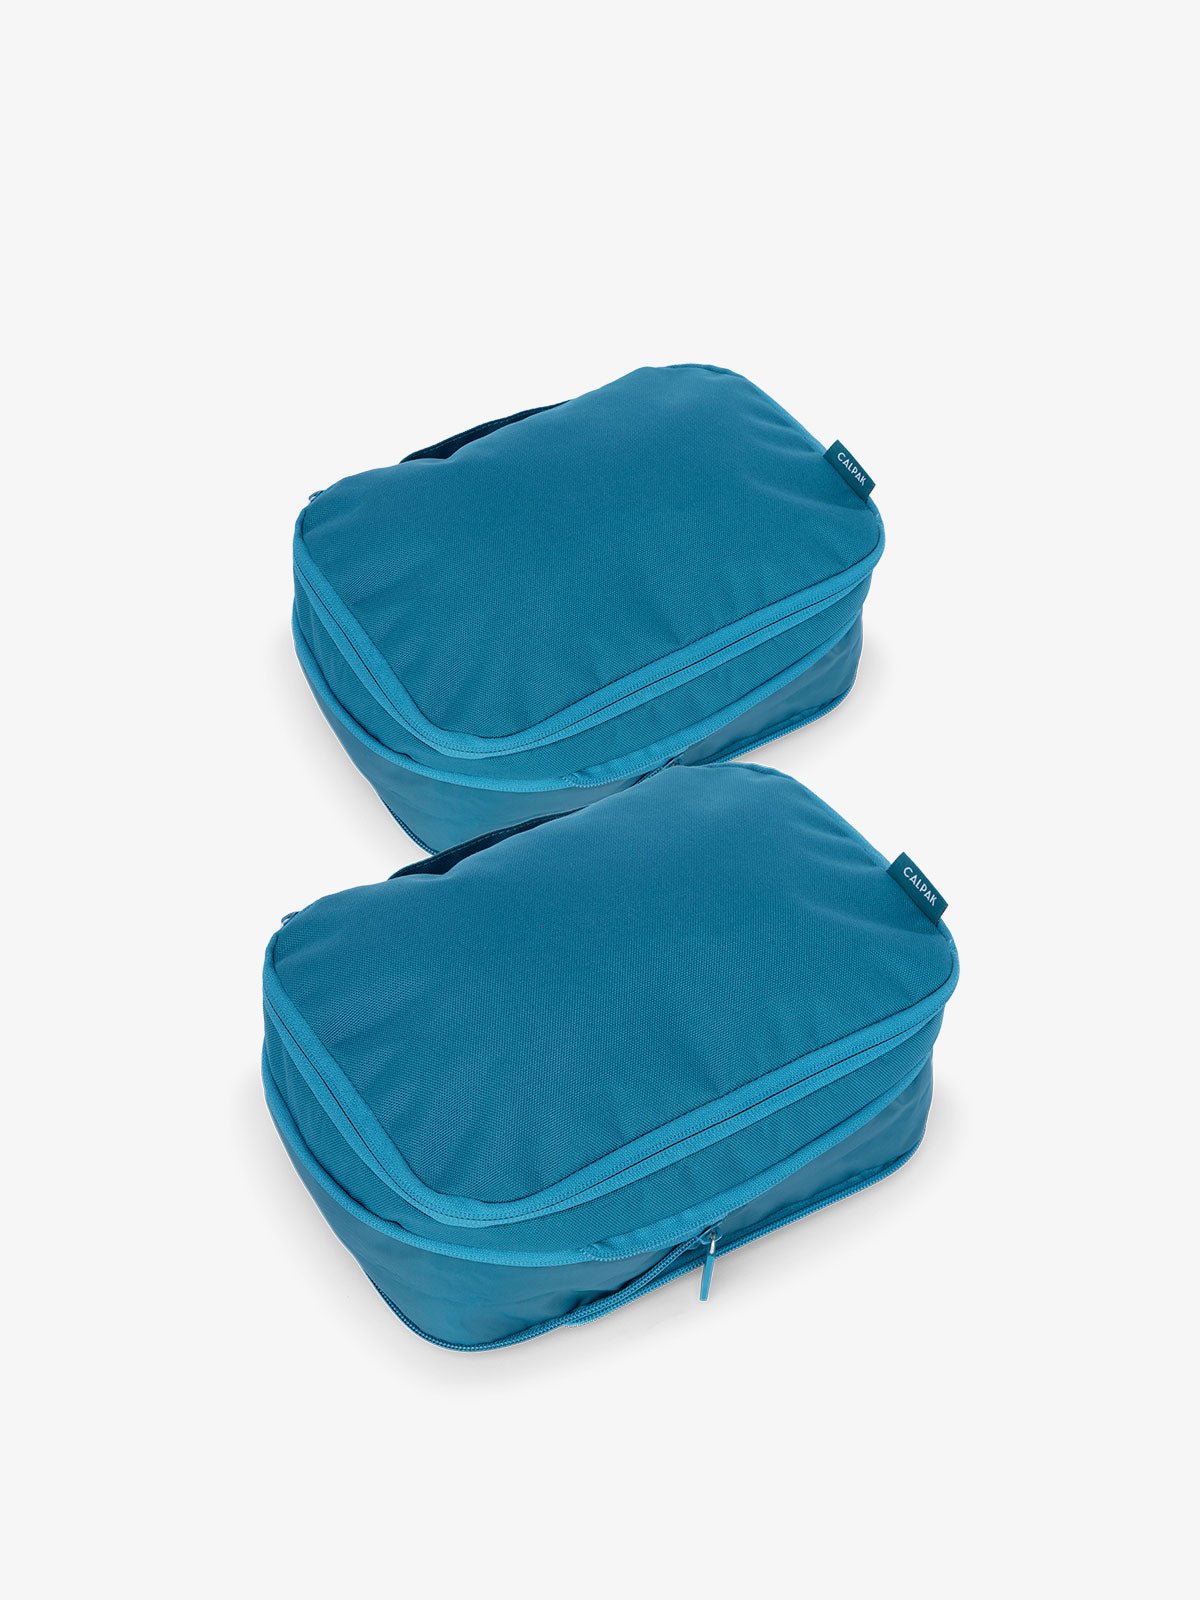 CALPAK small compression packing cubes with top handles and expandable by 4.5 inches in blue